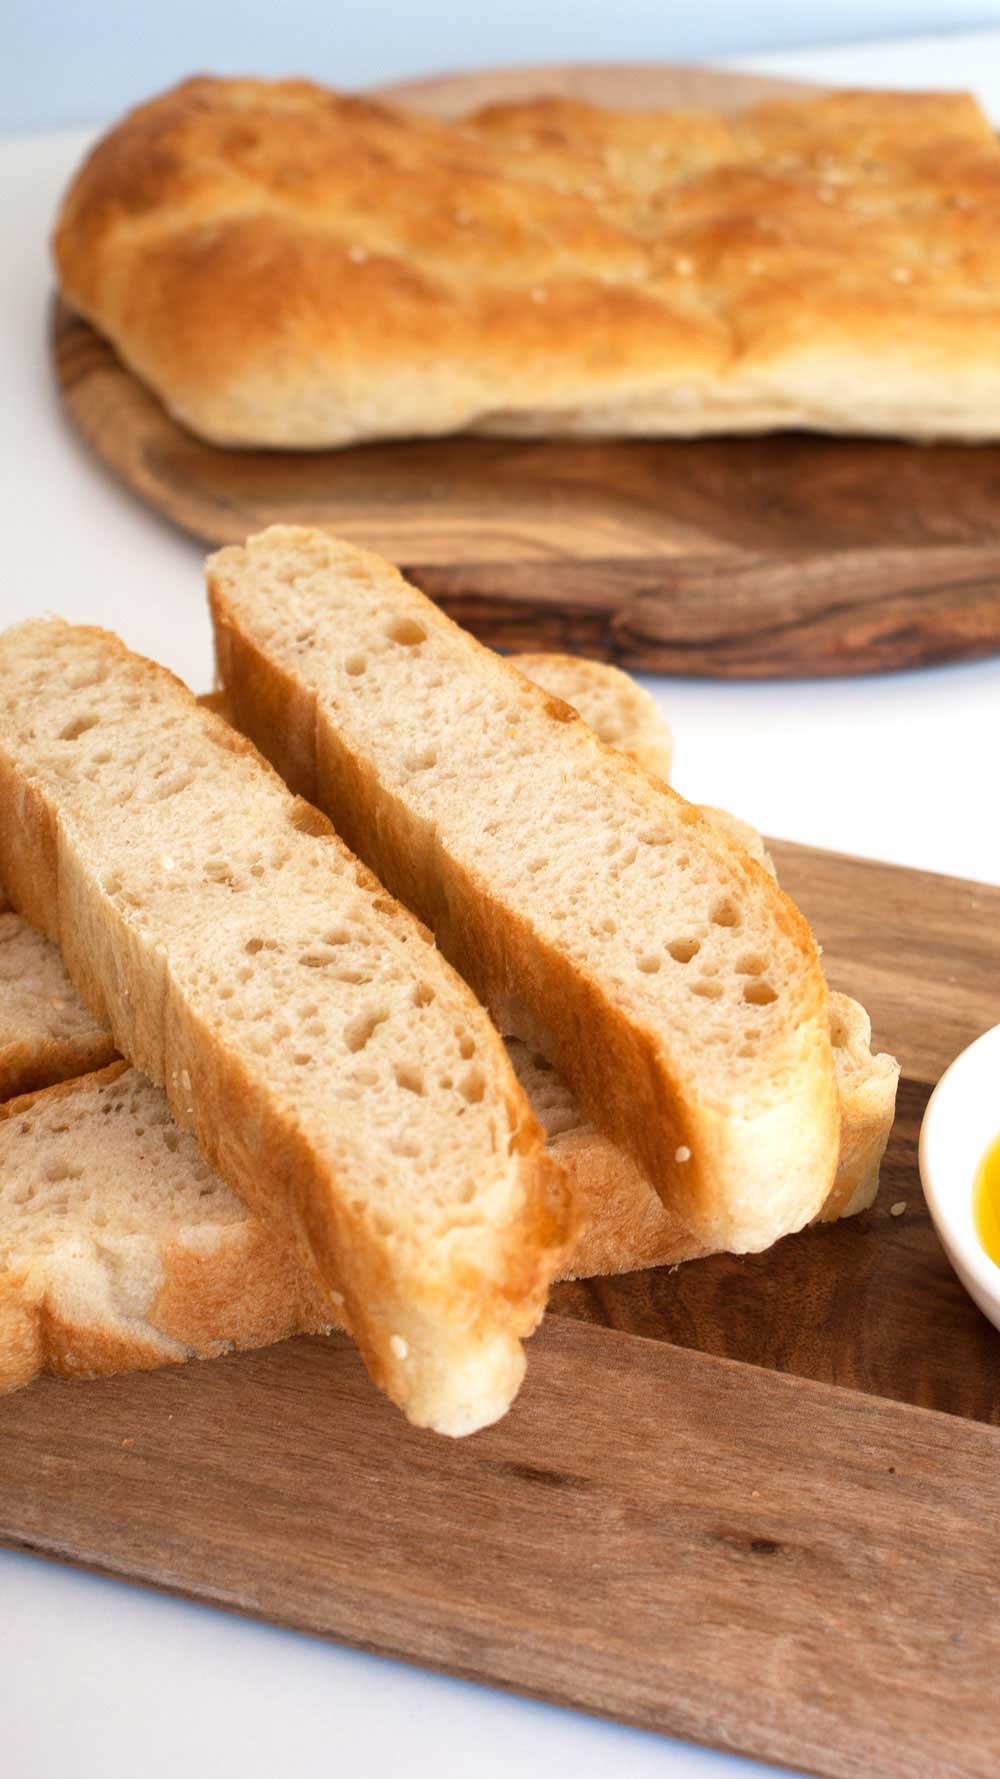 Turkish bread recipe. A delicious authentic loaf that can be frozen making it great to serve to last minute guests. Or enjoy as part of a meze style meal.